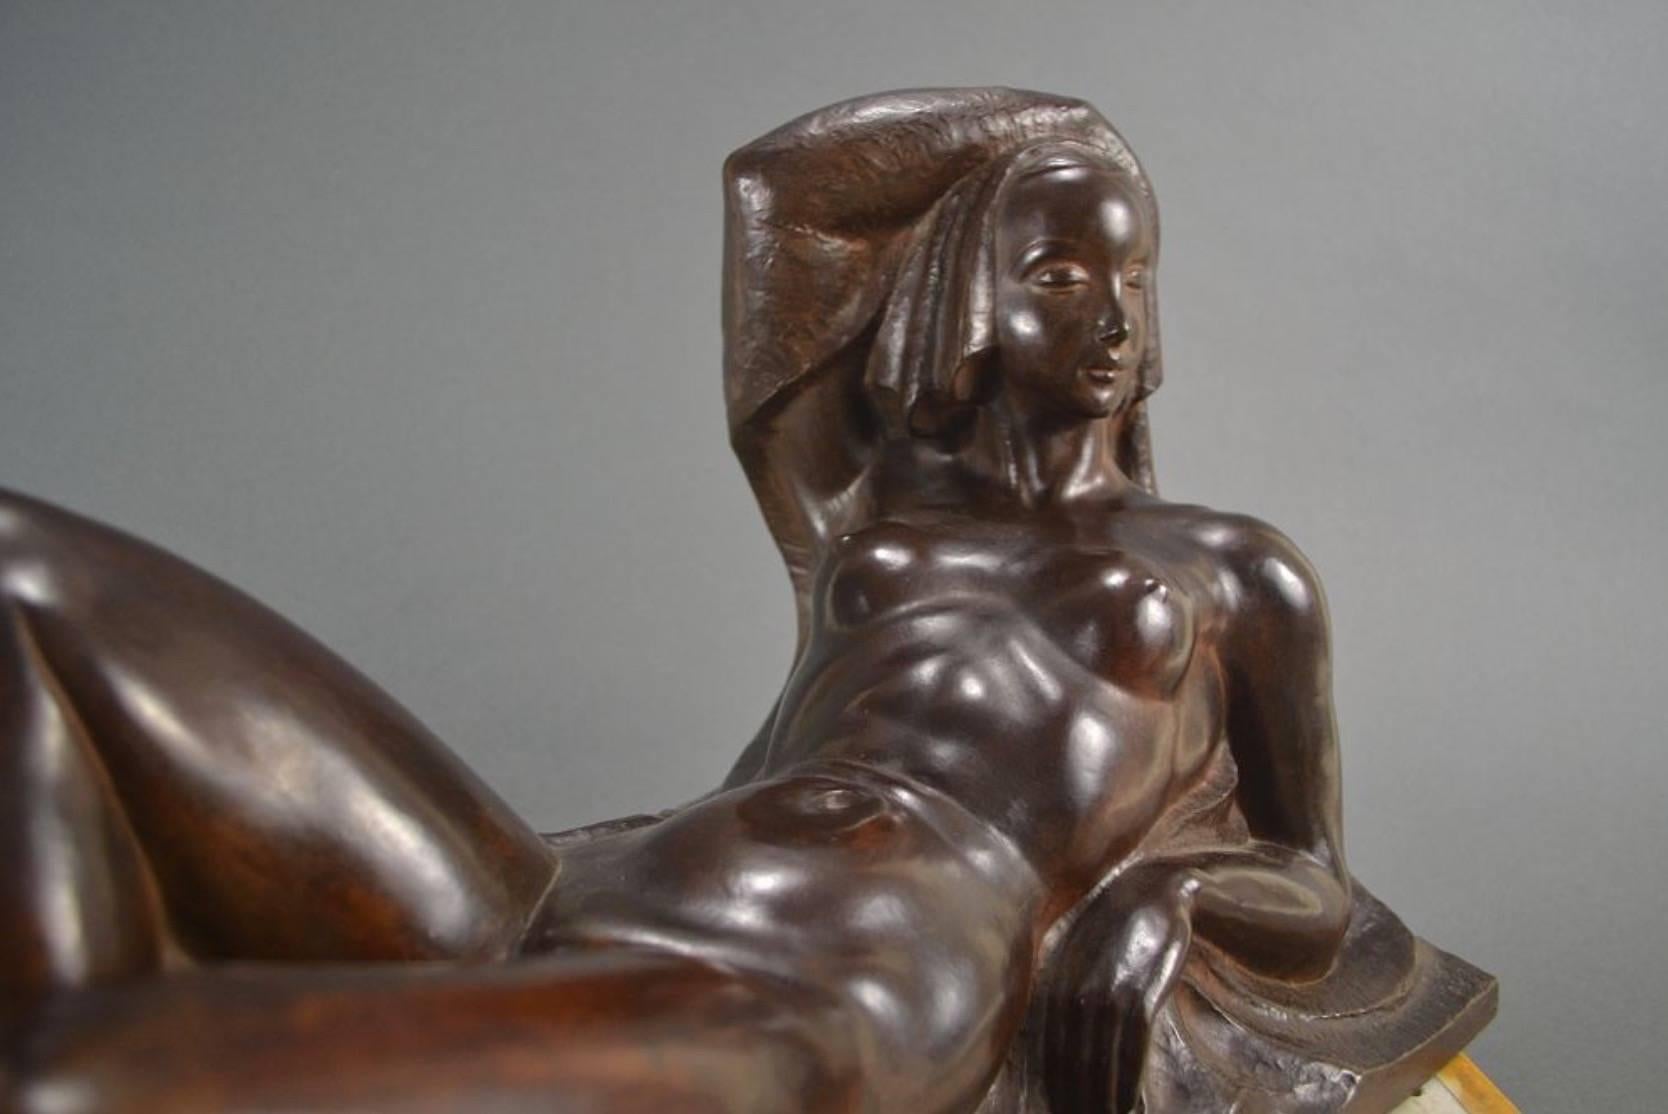 A rare Art Deco Bronze. Incredible quality from an important Belgian artist named Jan Anteunis, (1896-1973). It is not often that we are able to find a piece with all of these qualities: beautiful period style, excellent proportions, amazing bronze